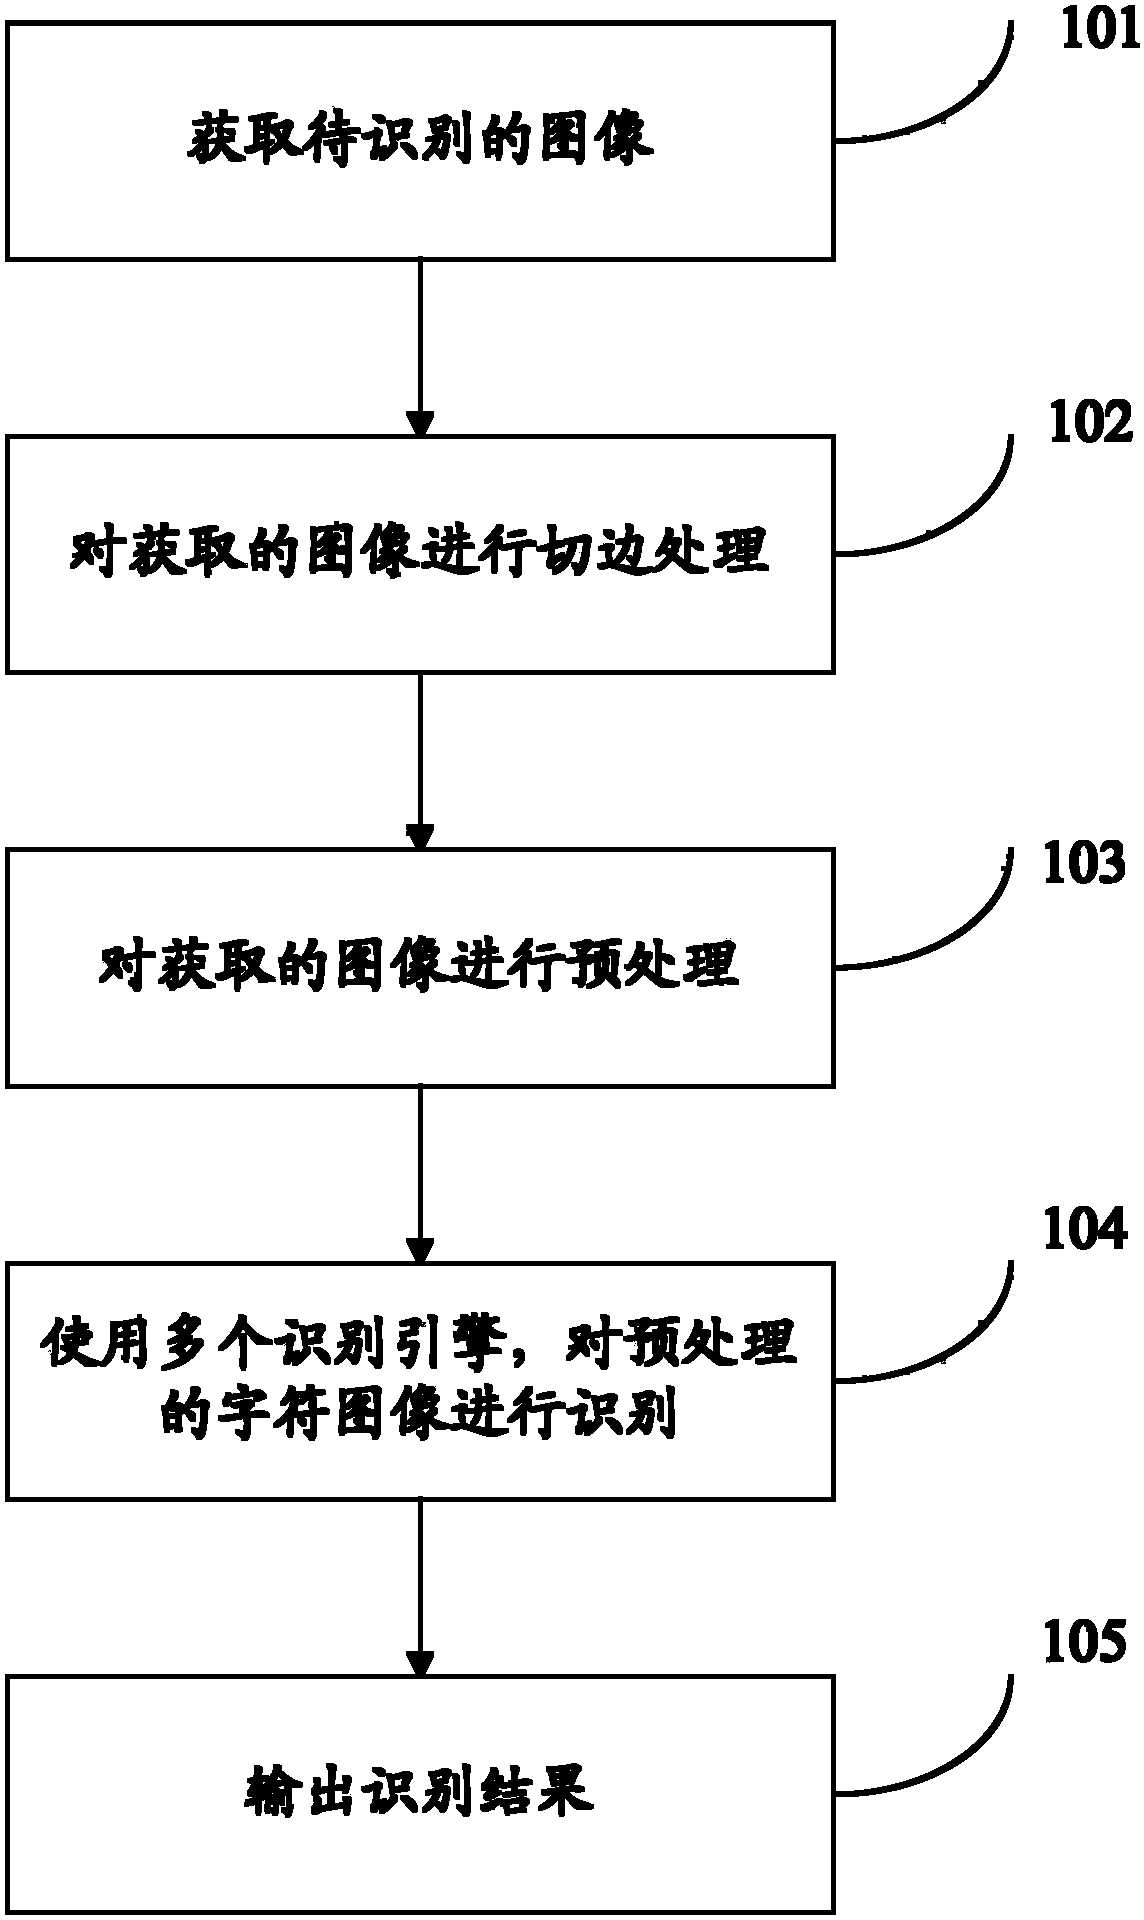 Method and device for processing images